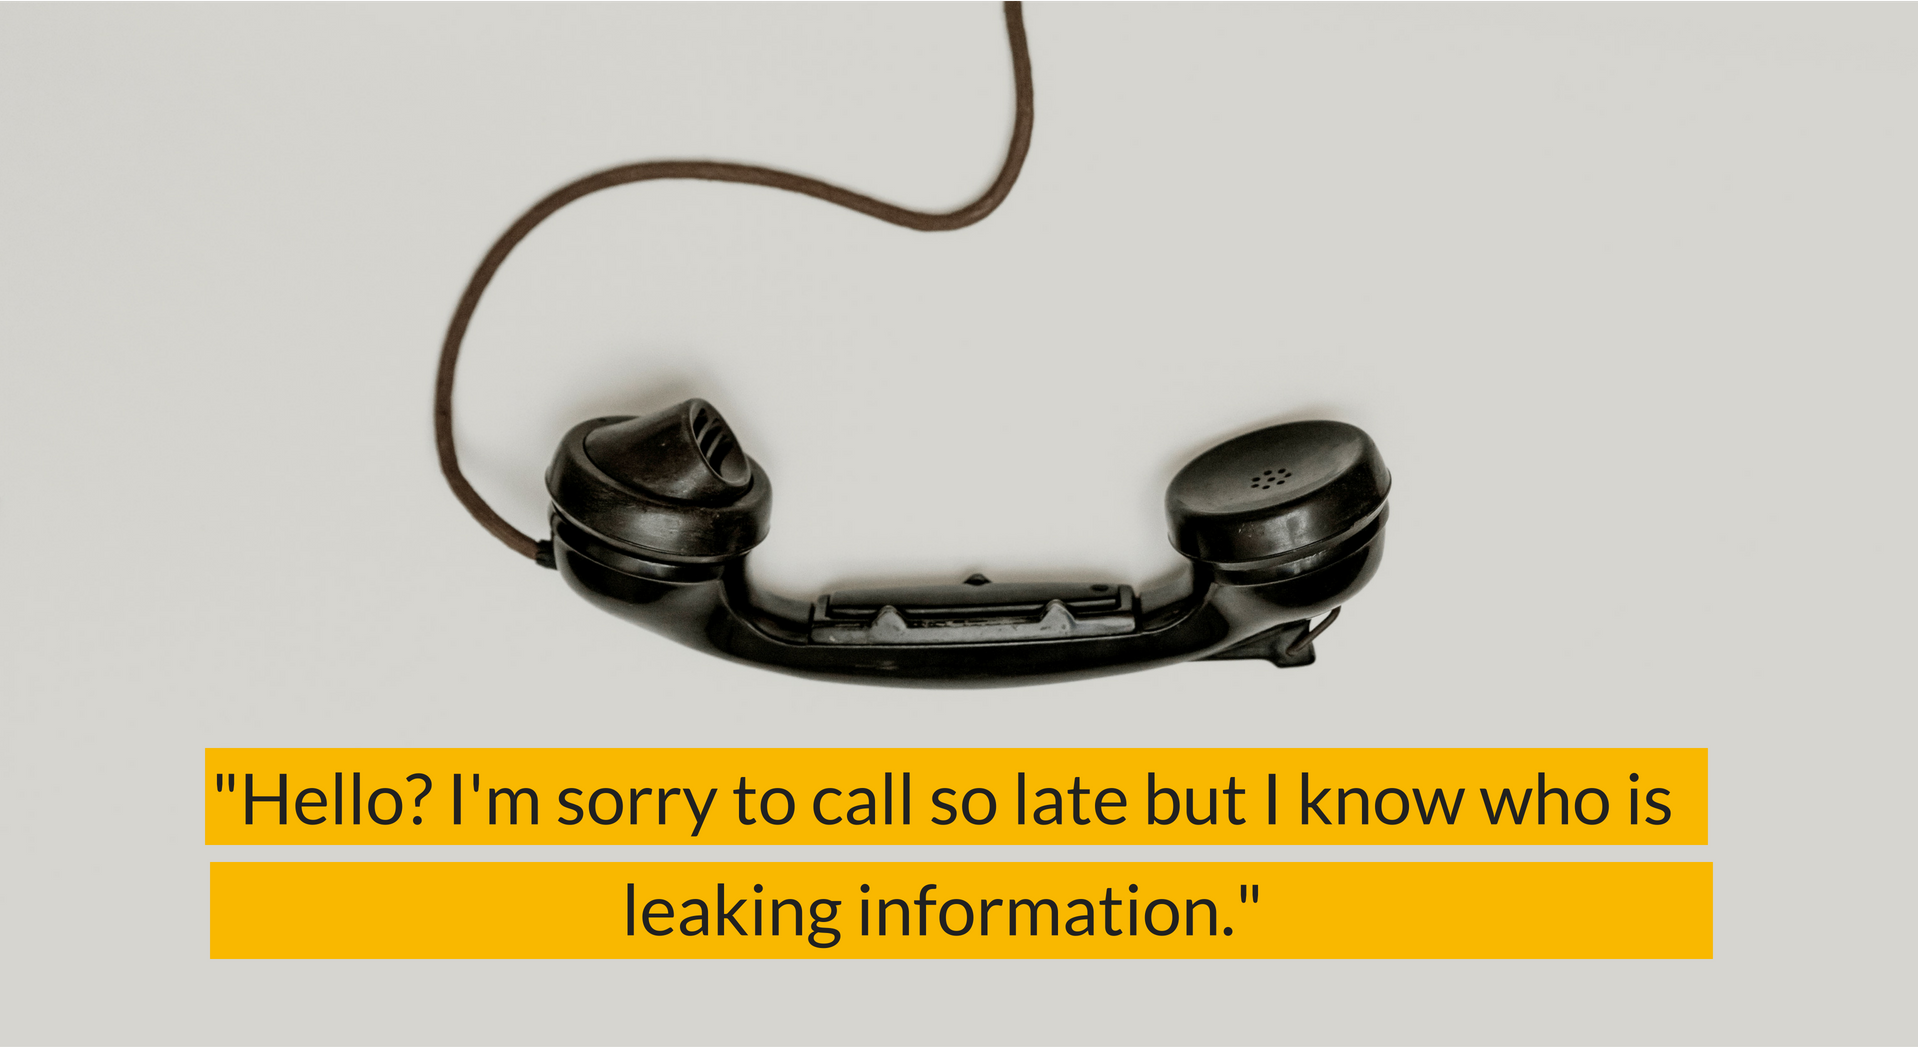 Hello, I'm sorry to call so late, but I know who is leaking information.